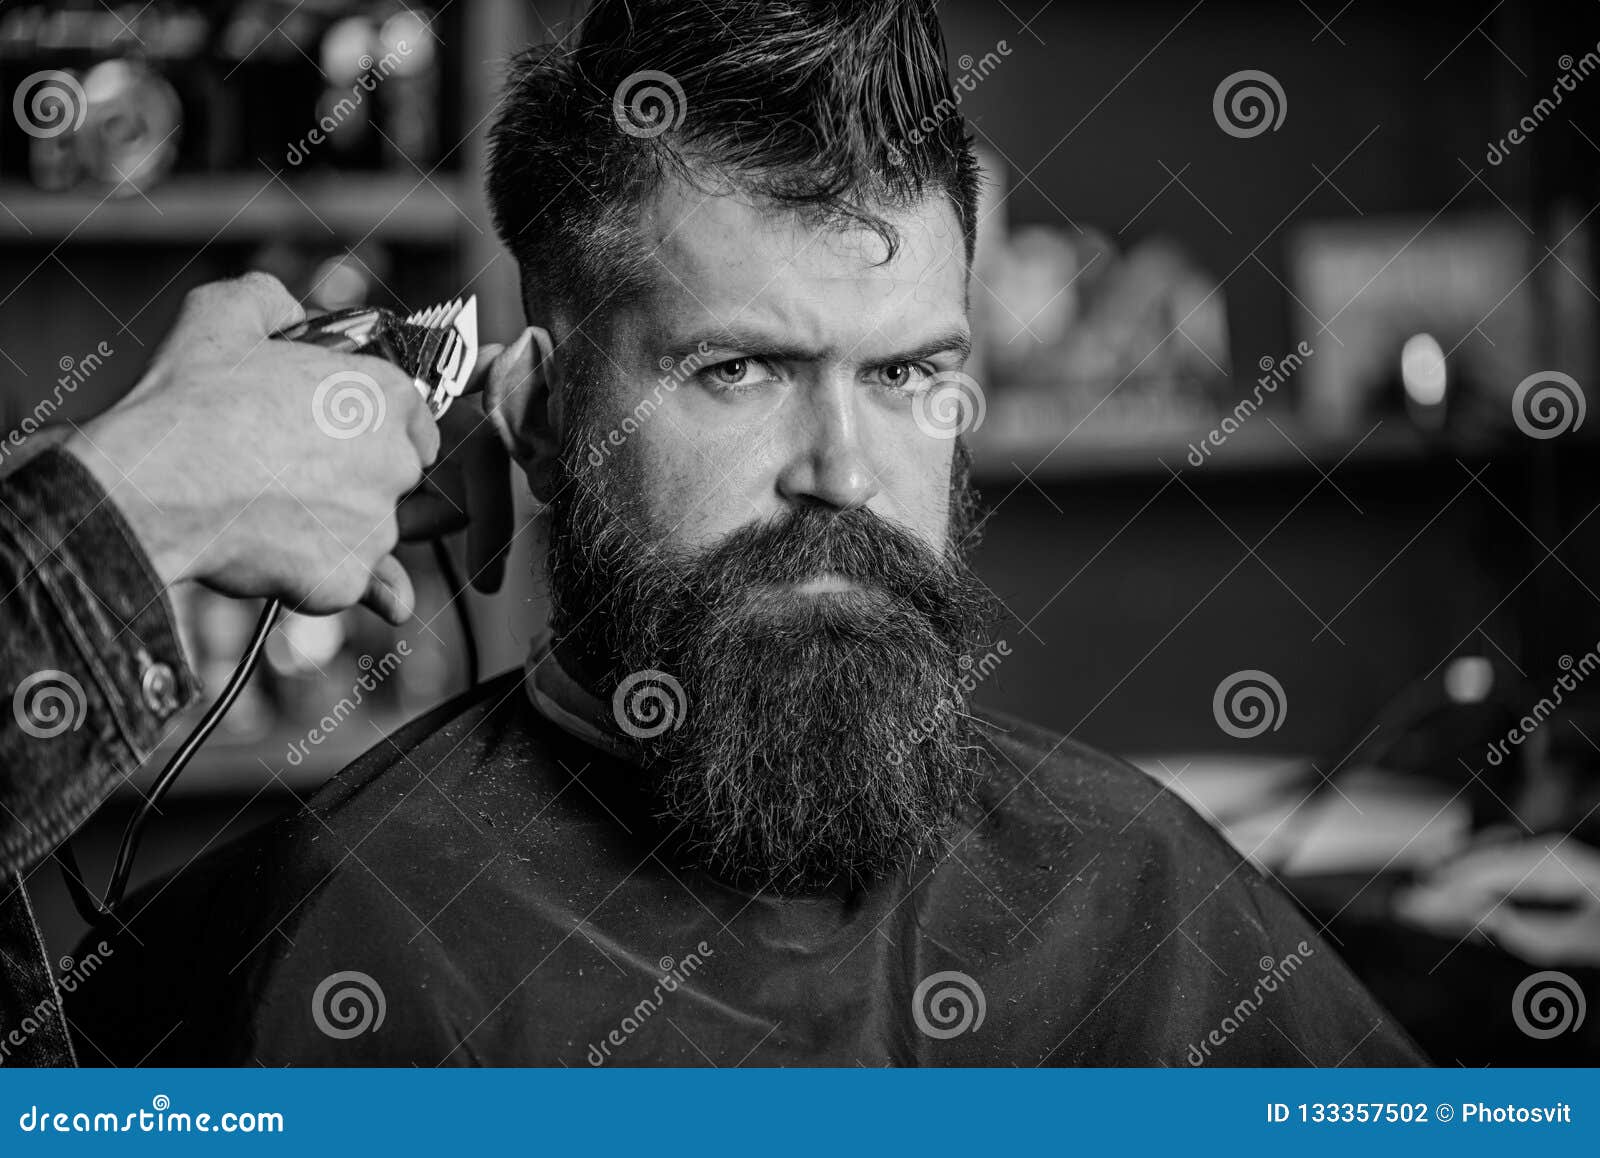 Barber Works with Hair Clipper. Barbershop Concept. Hands of Barber ...